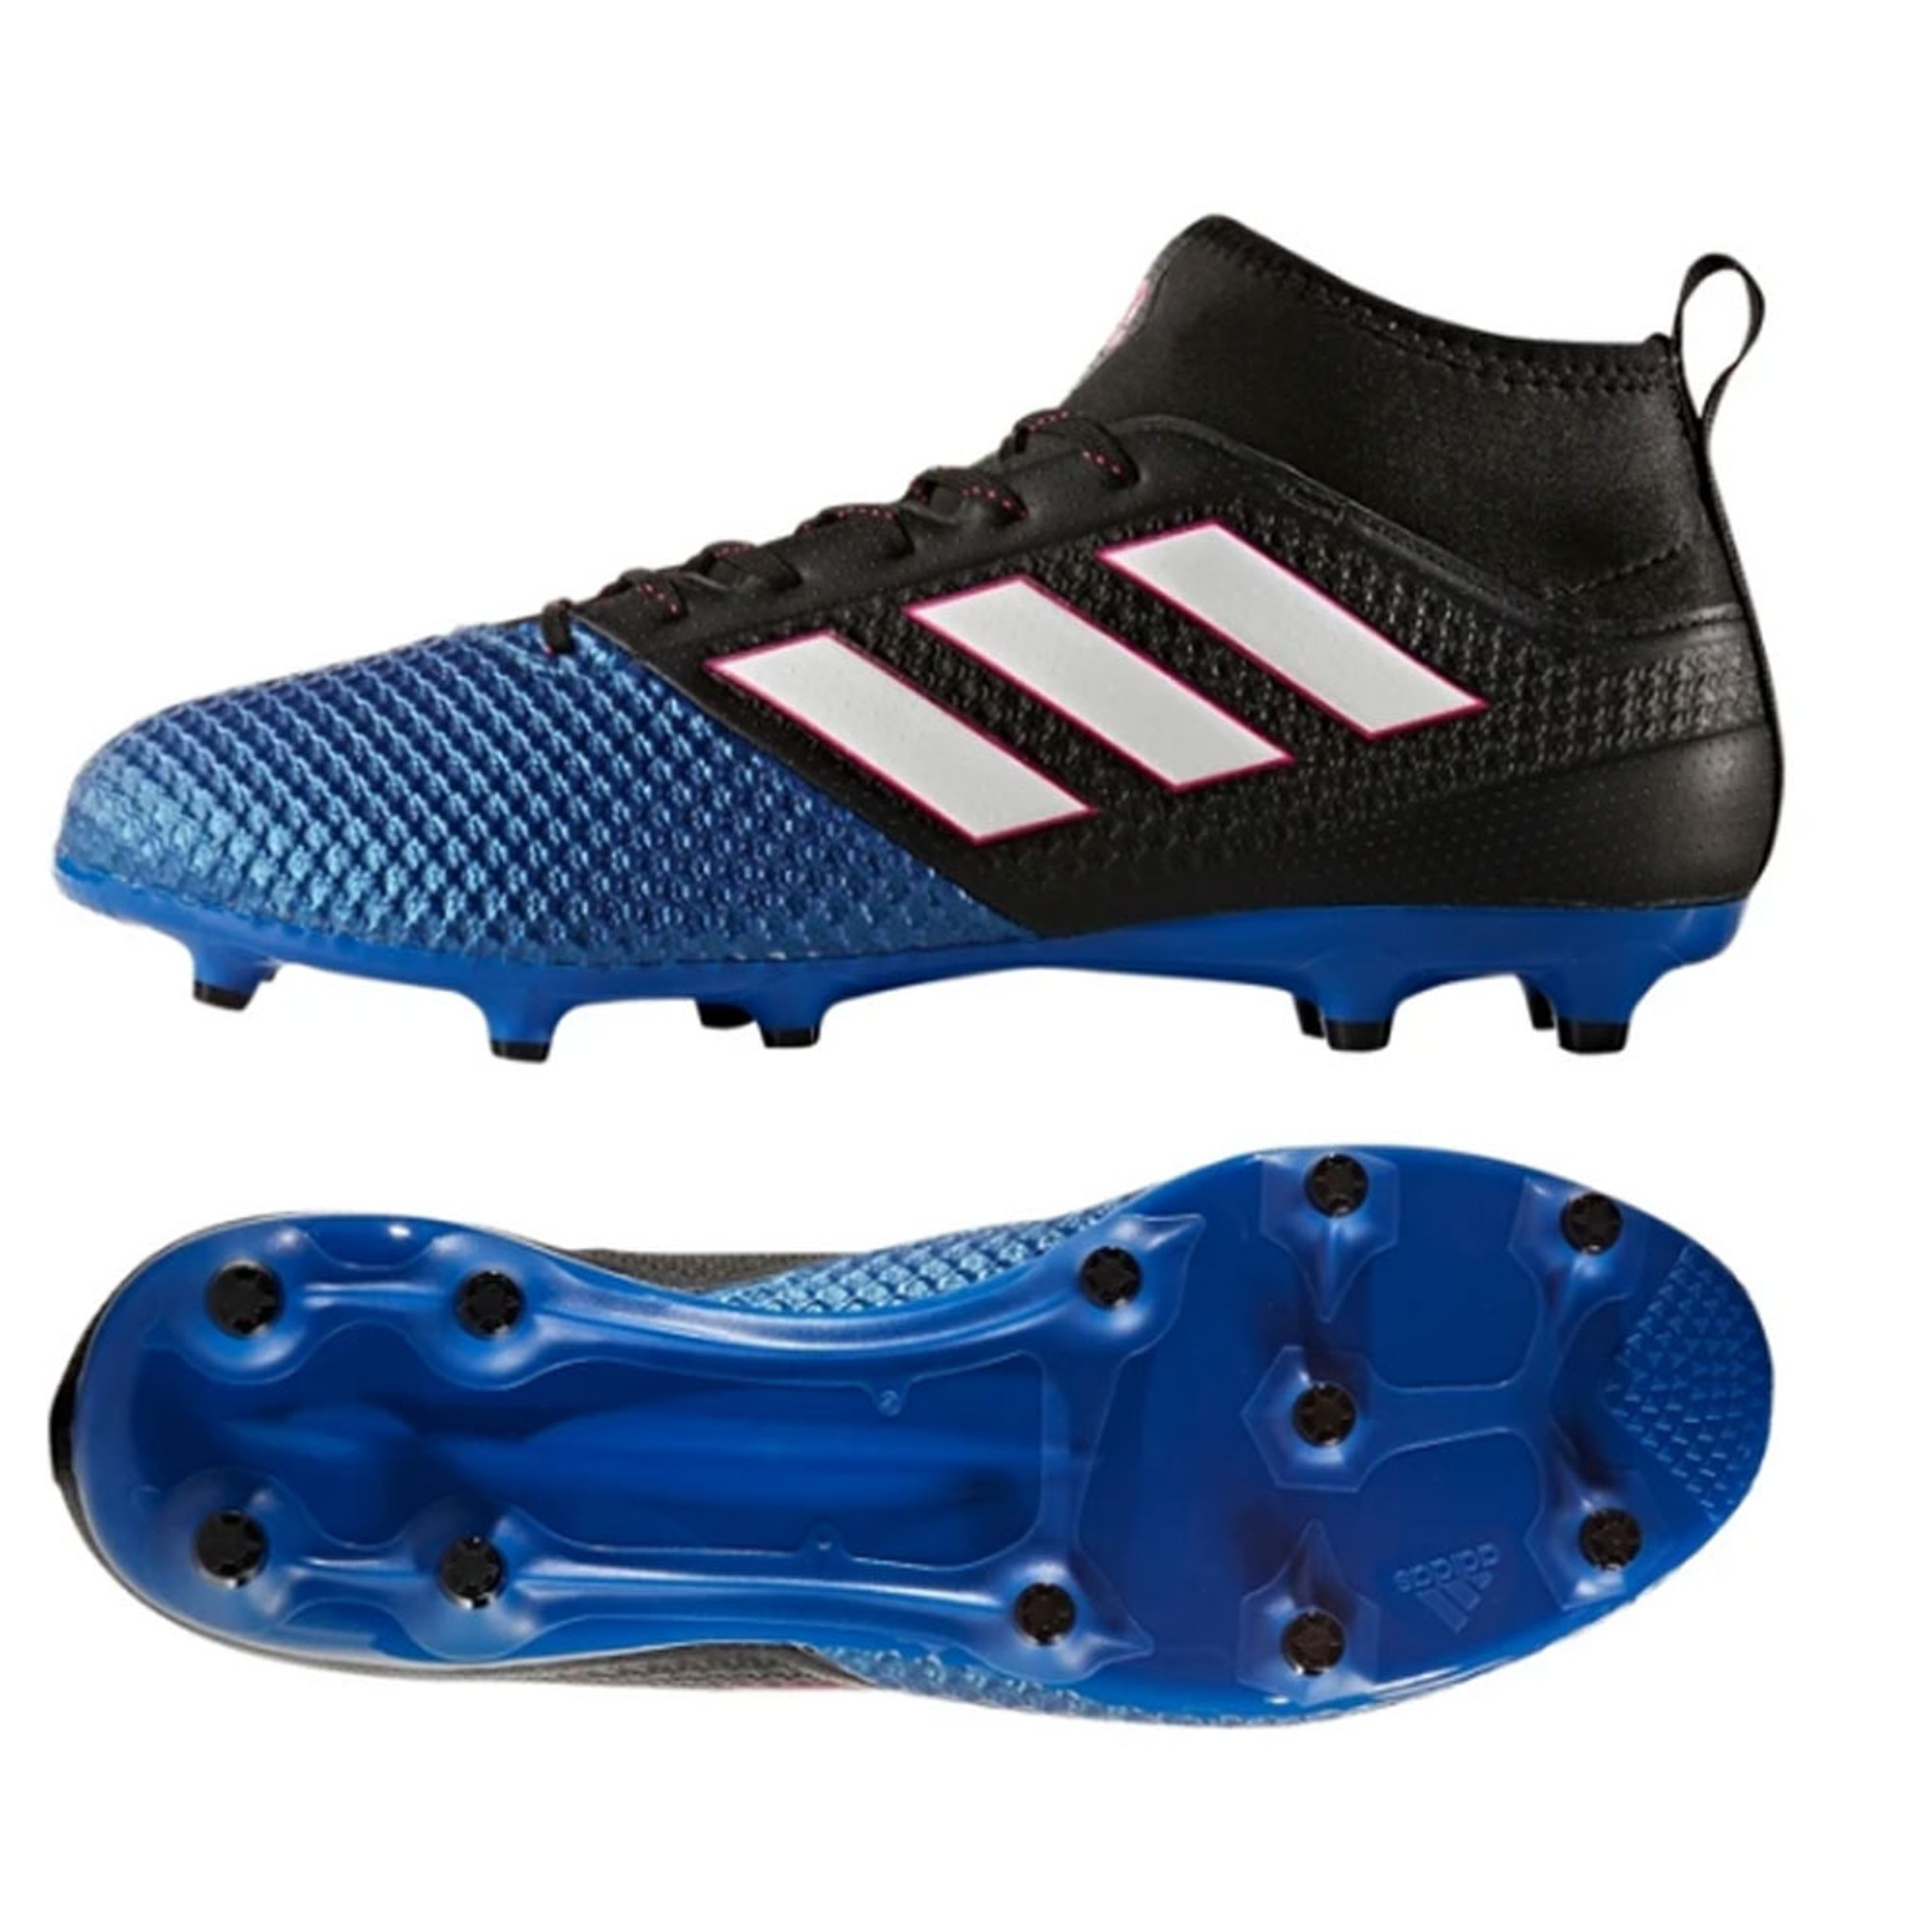 adidas 17.3 soccer cleats